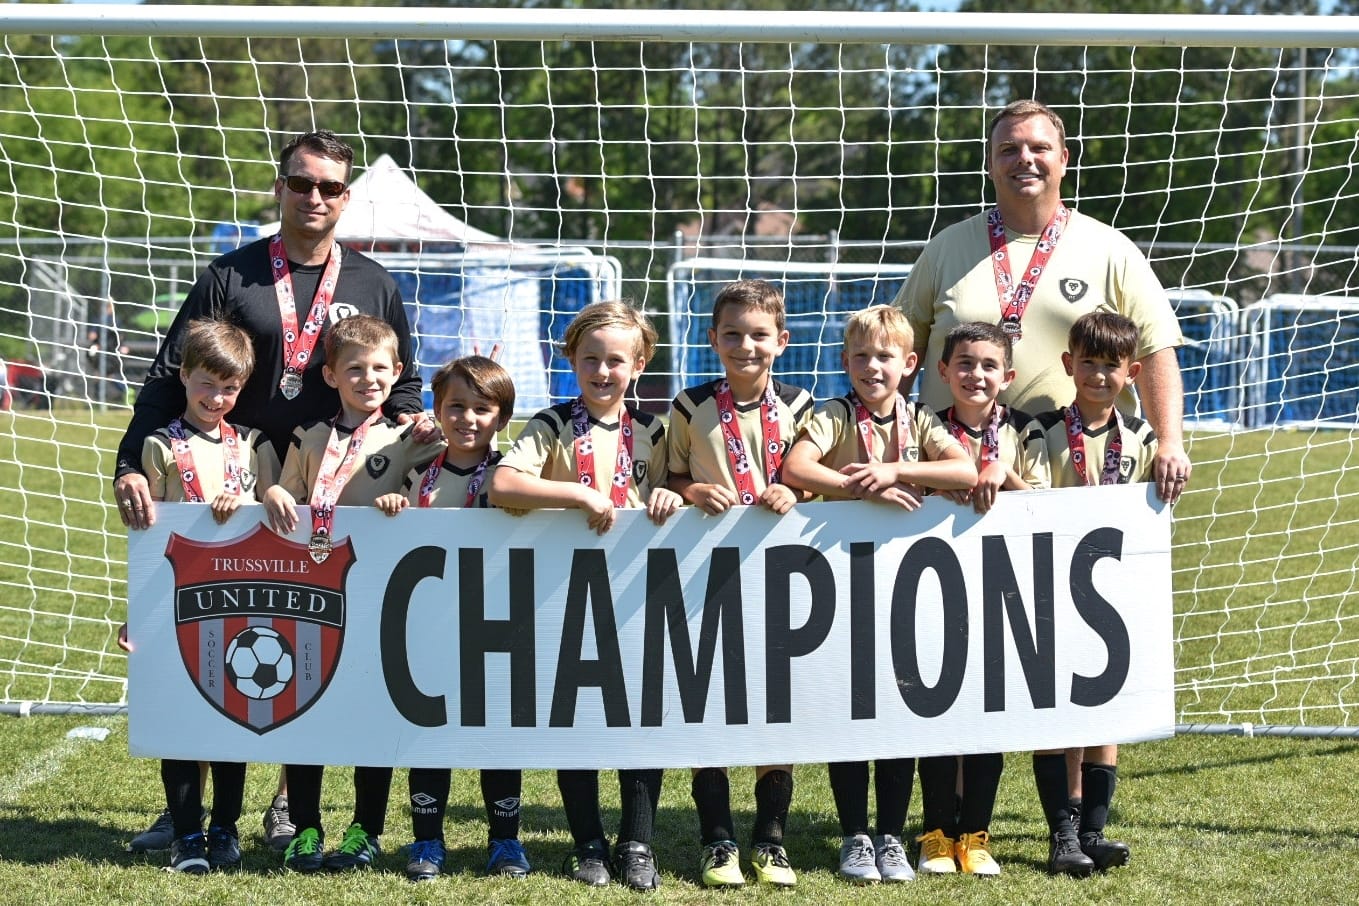 CHAMPIONS - TRUSSVILLE UNITED CLASSIC - SPRING 2021